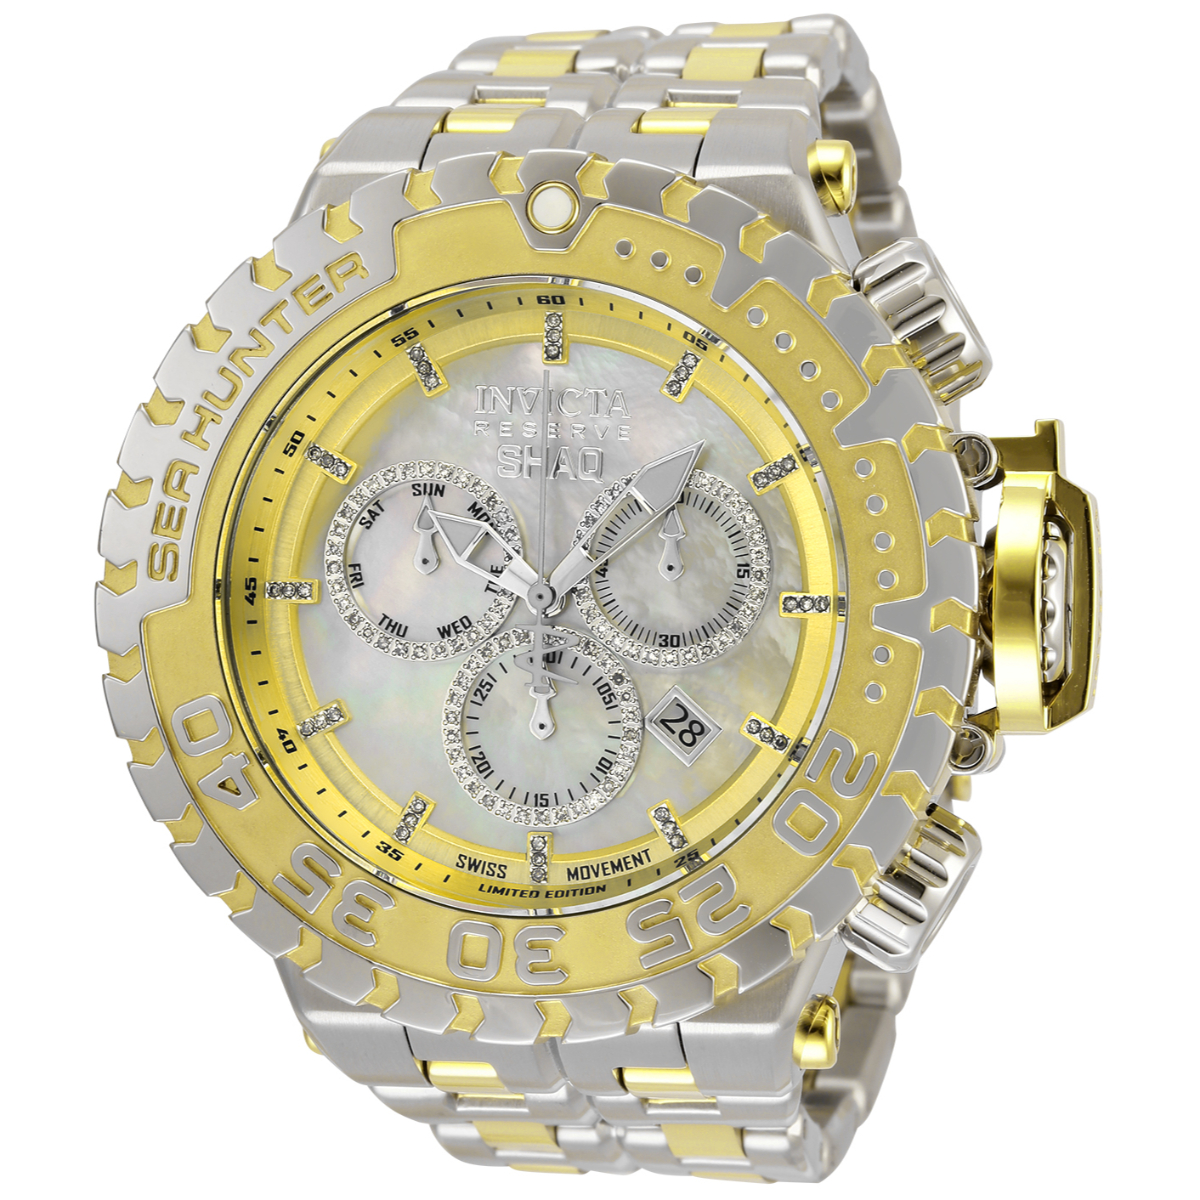 Pre-Owned Invicta SHAQ .52 Carat Diamond Men%27s Watch w/Mother of Pearl Dial - 57mm, Steel, Gold (AIC-34613)